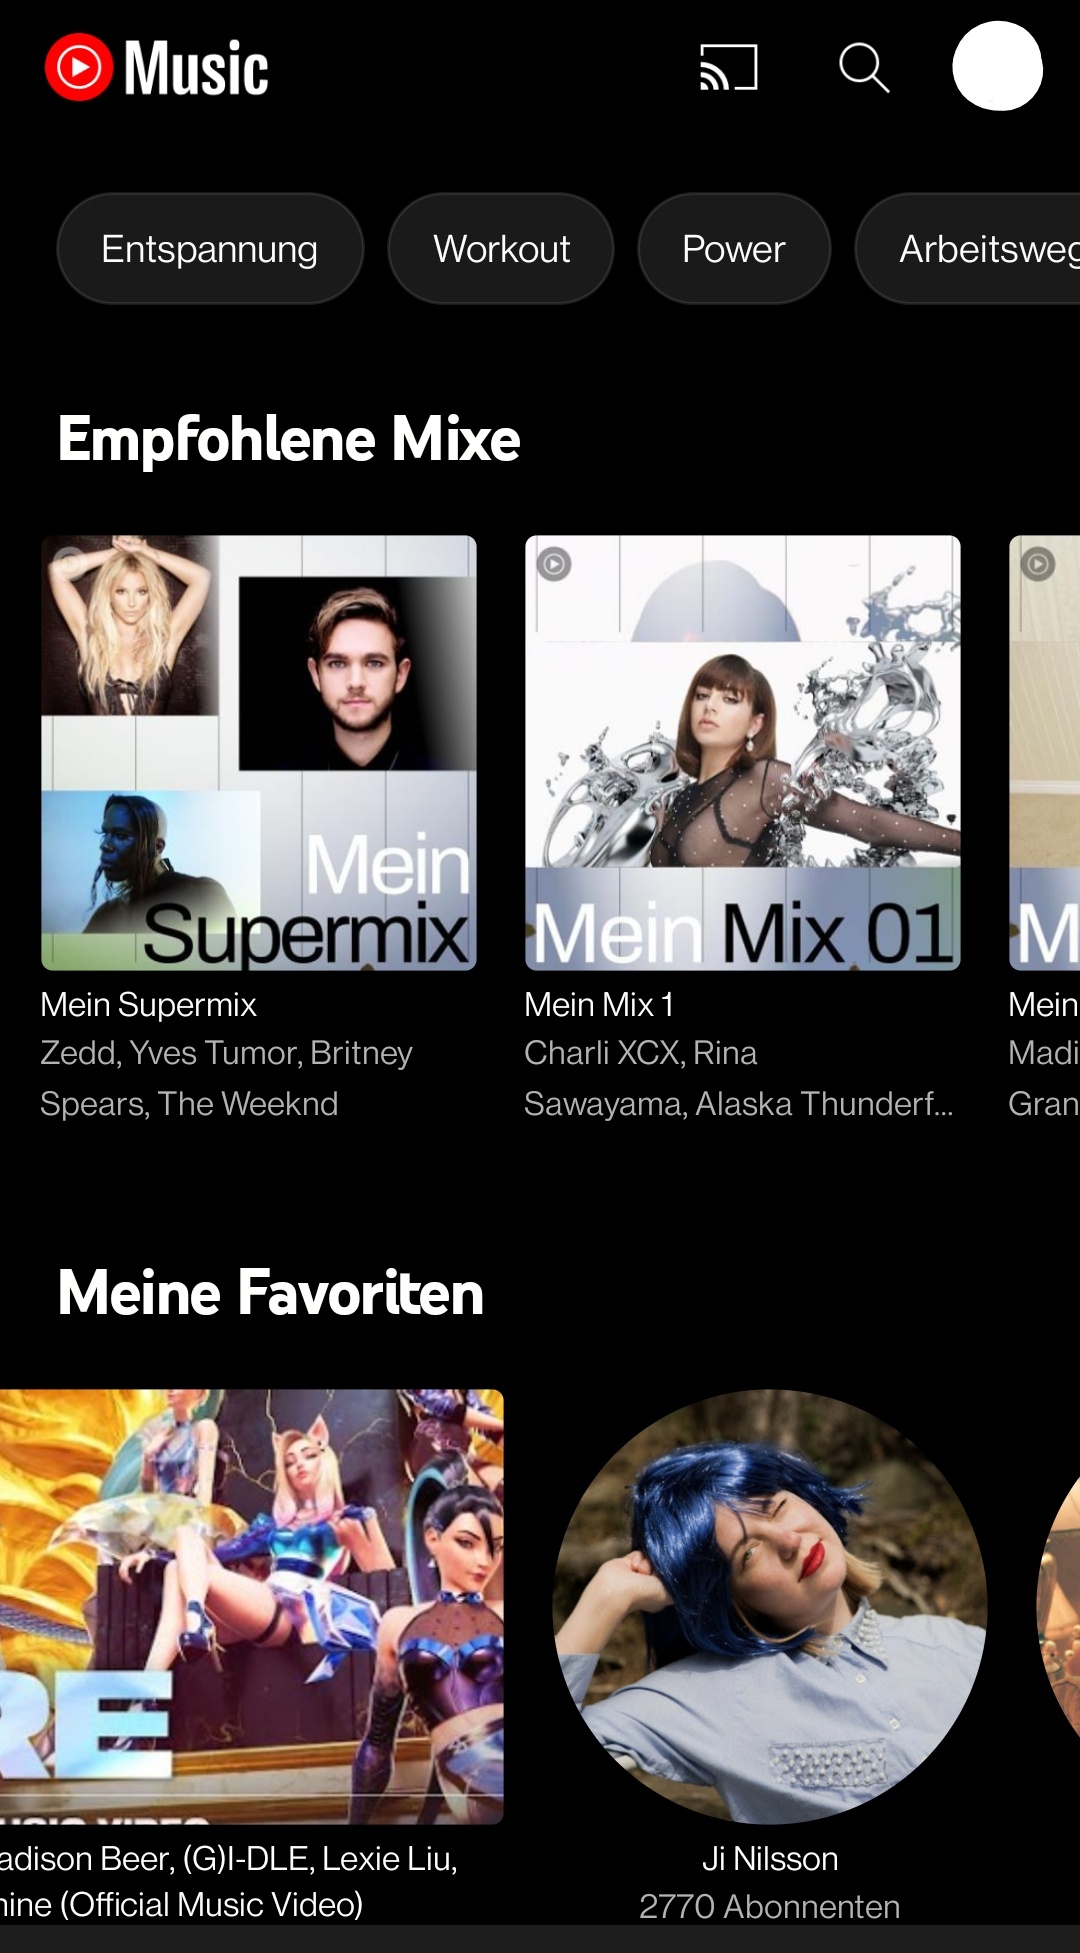 youtube music your mix covers